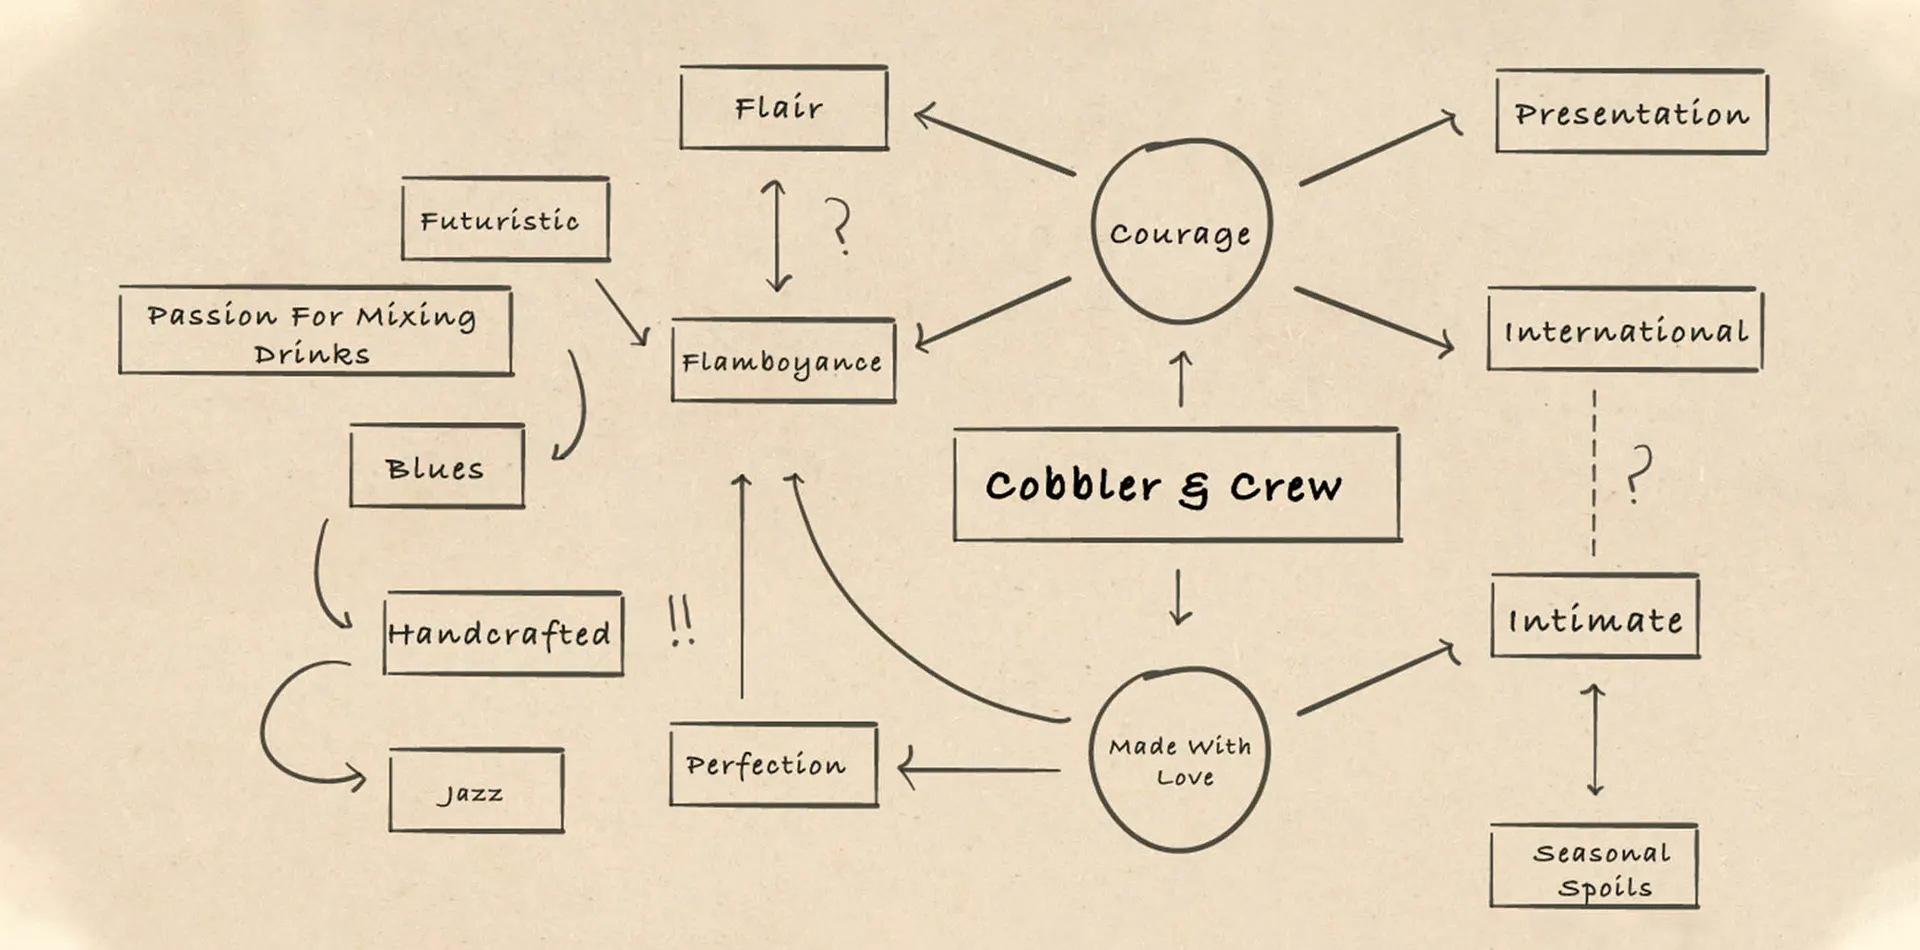 Mind map of keywords related to the Cobbler and Crew.